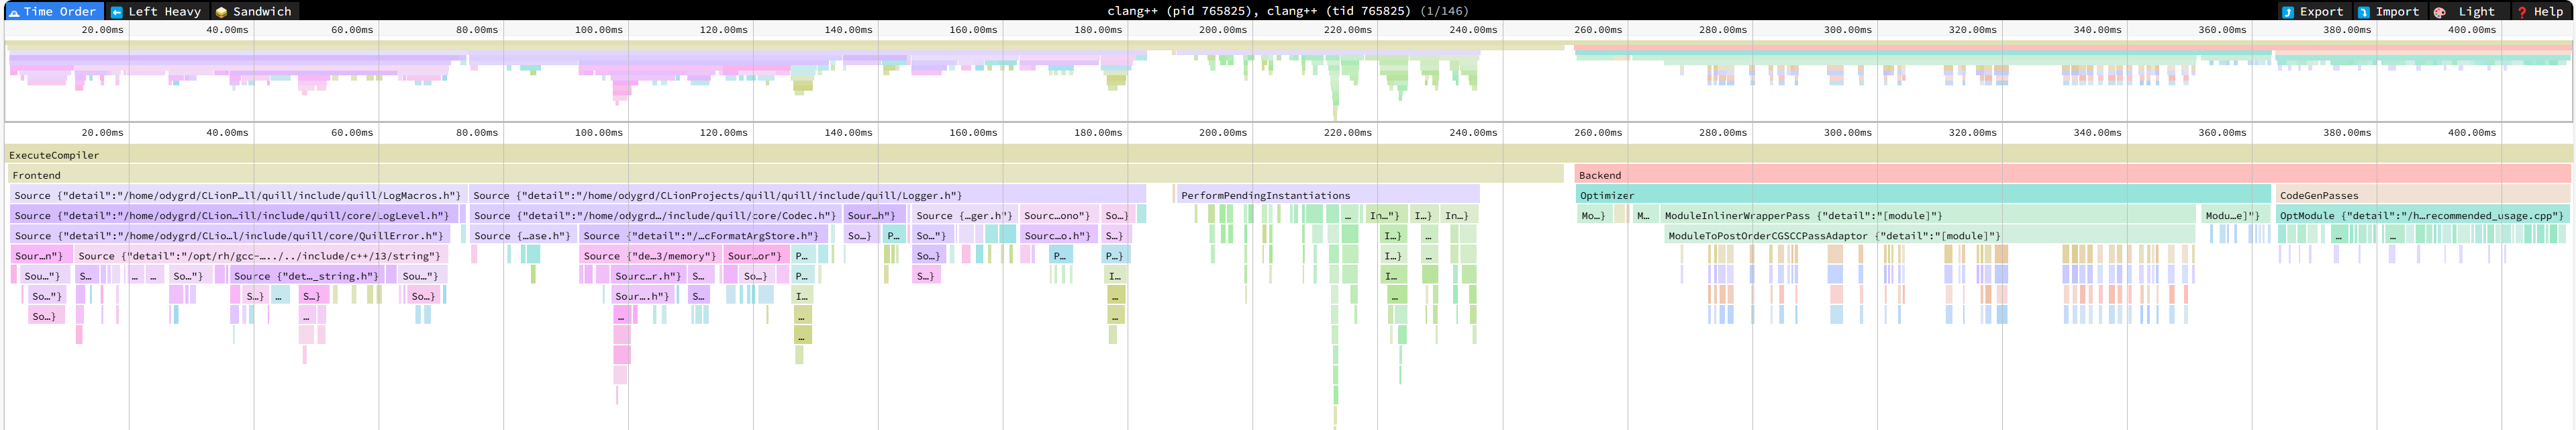 quill_v5_1_compiler_profile.speedscope.png